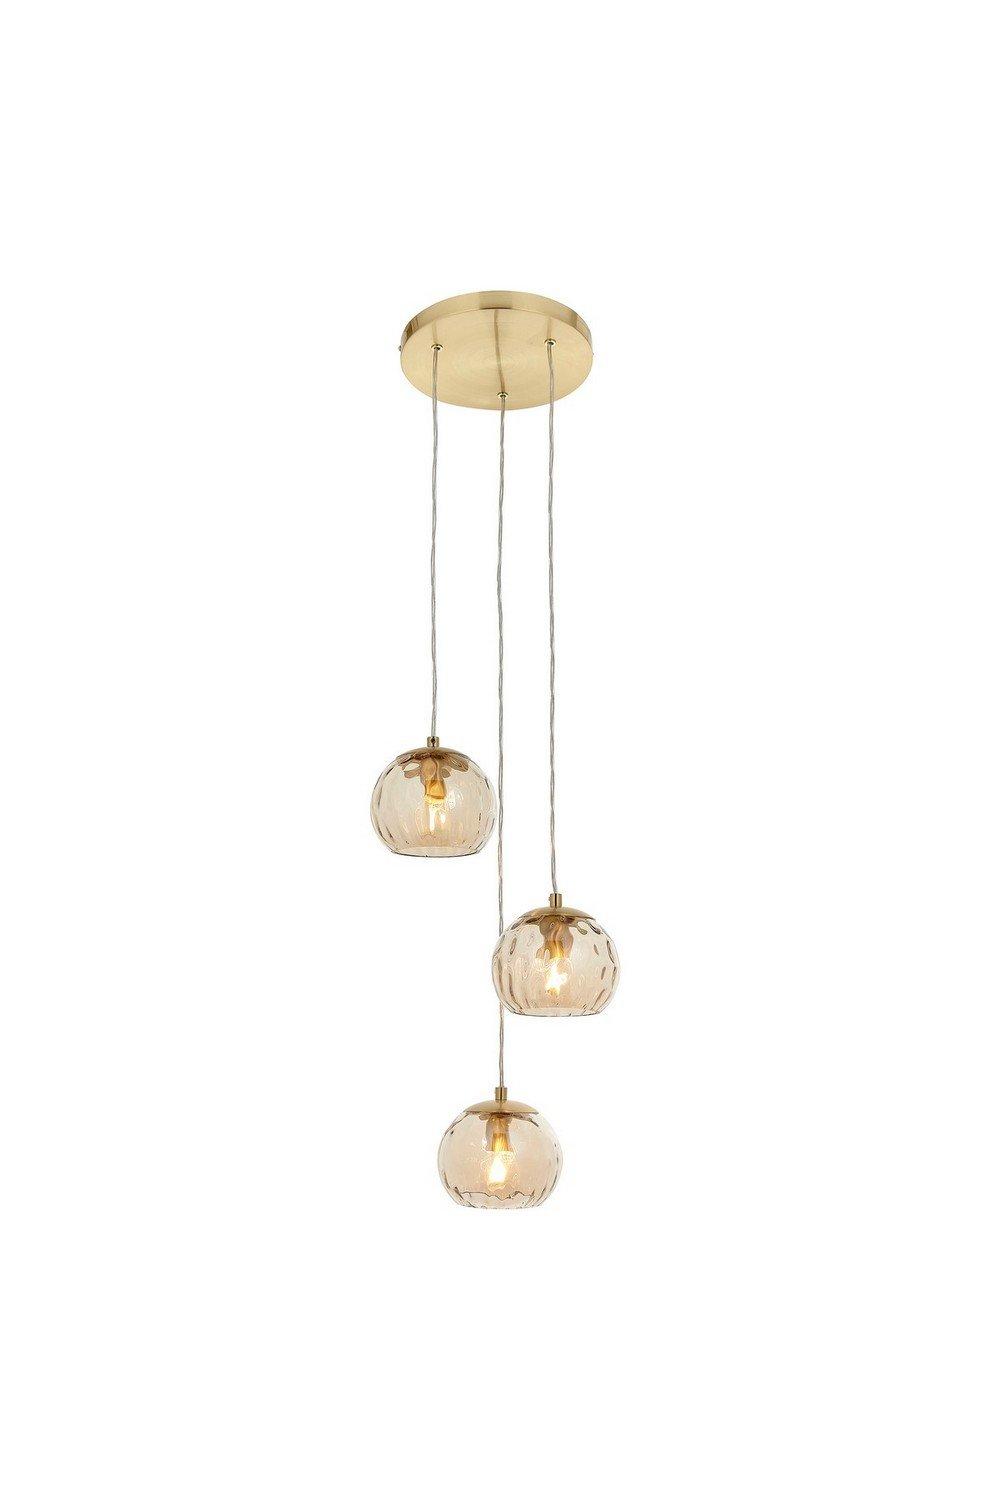 Dimple Modern Cluster 3 Light Pendant Brushed Brass Champagne Glass Shade